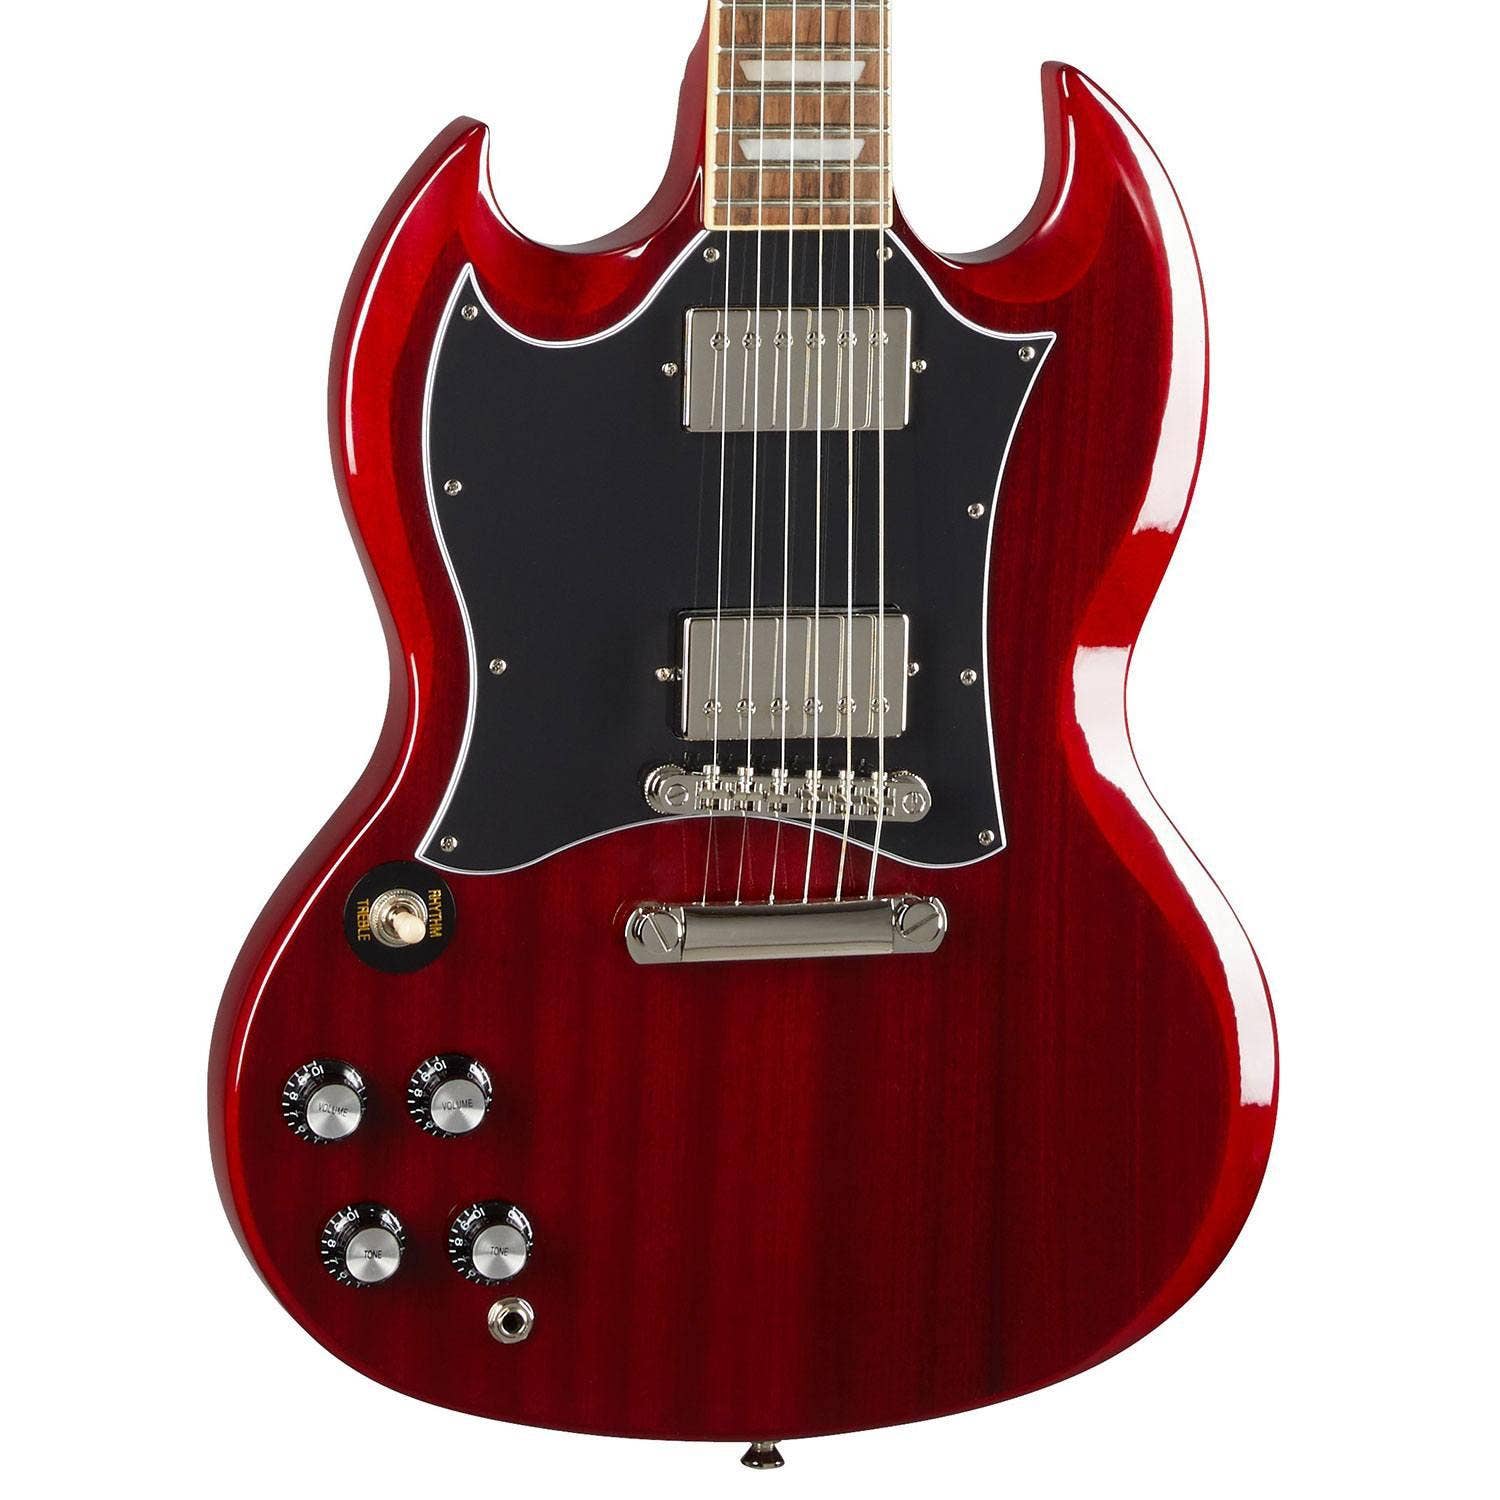 Epiphone SG Standard Left-Handed Electric Guitar (Heritage Cherry)